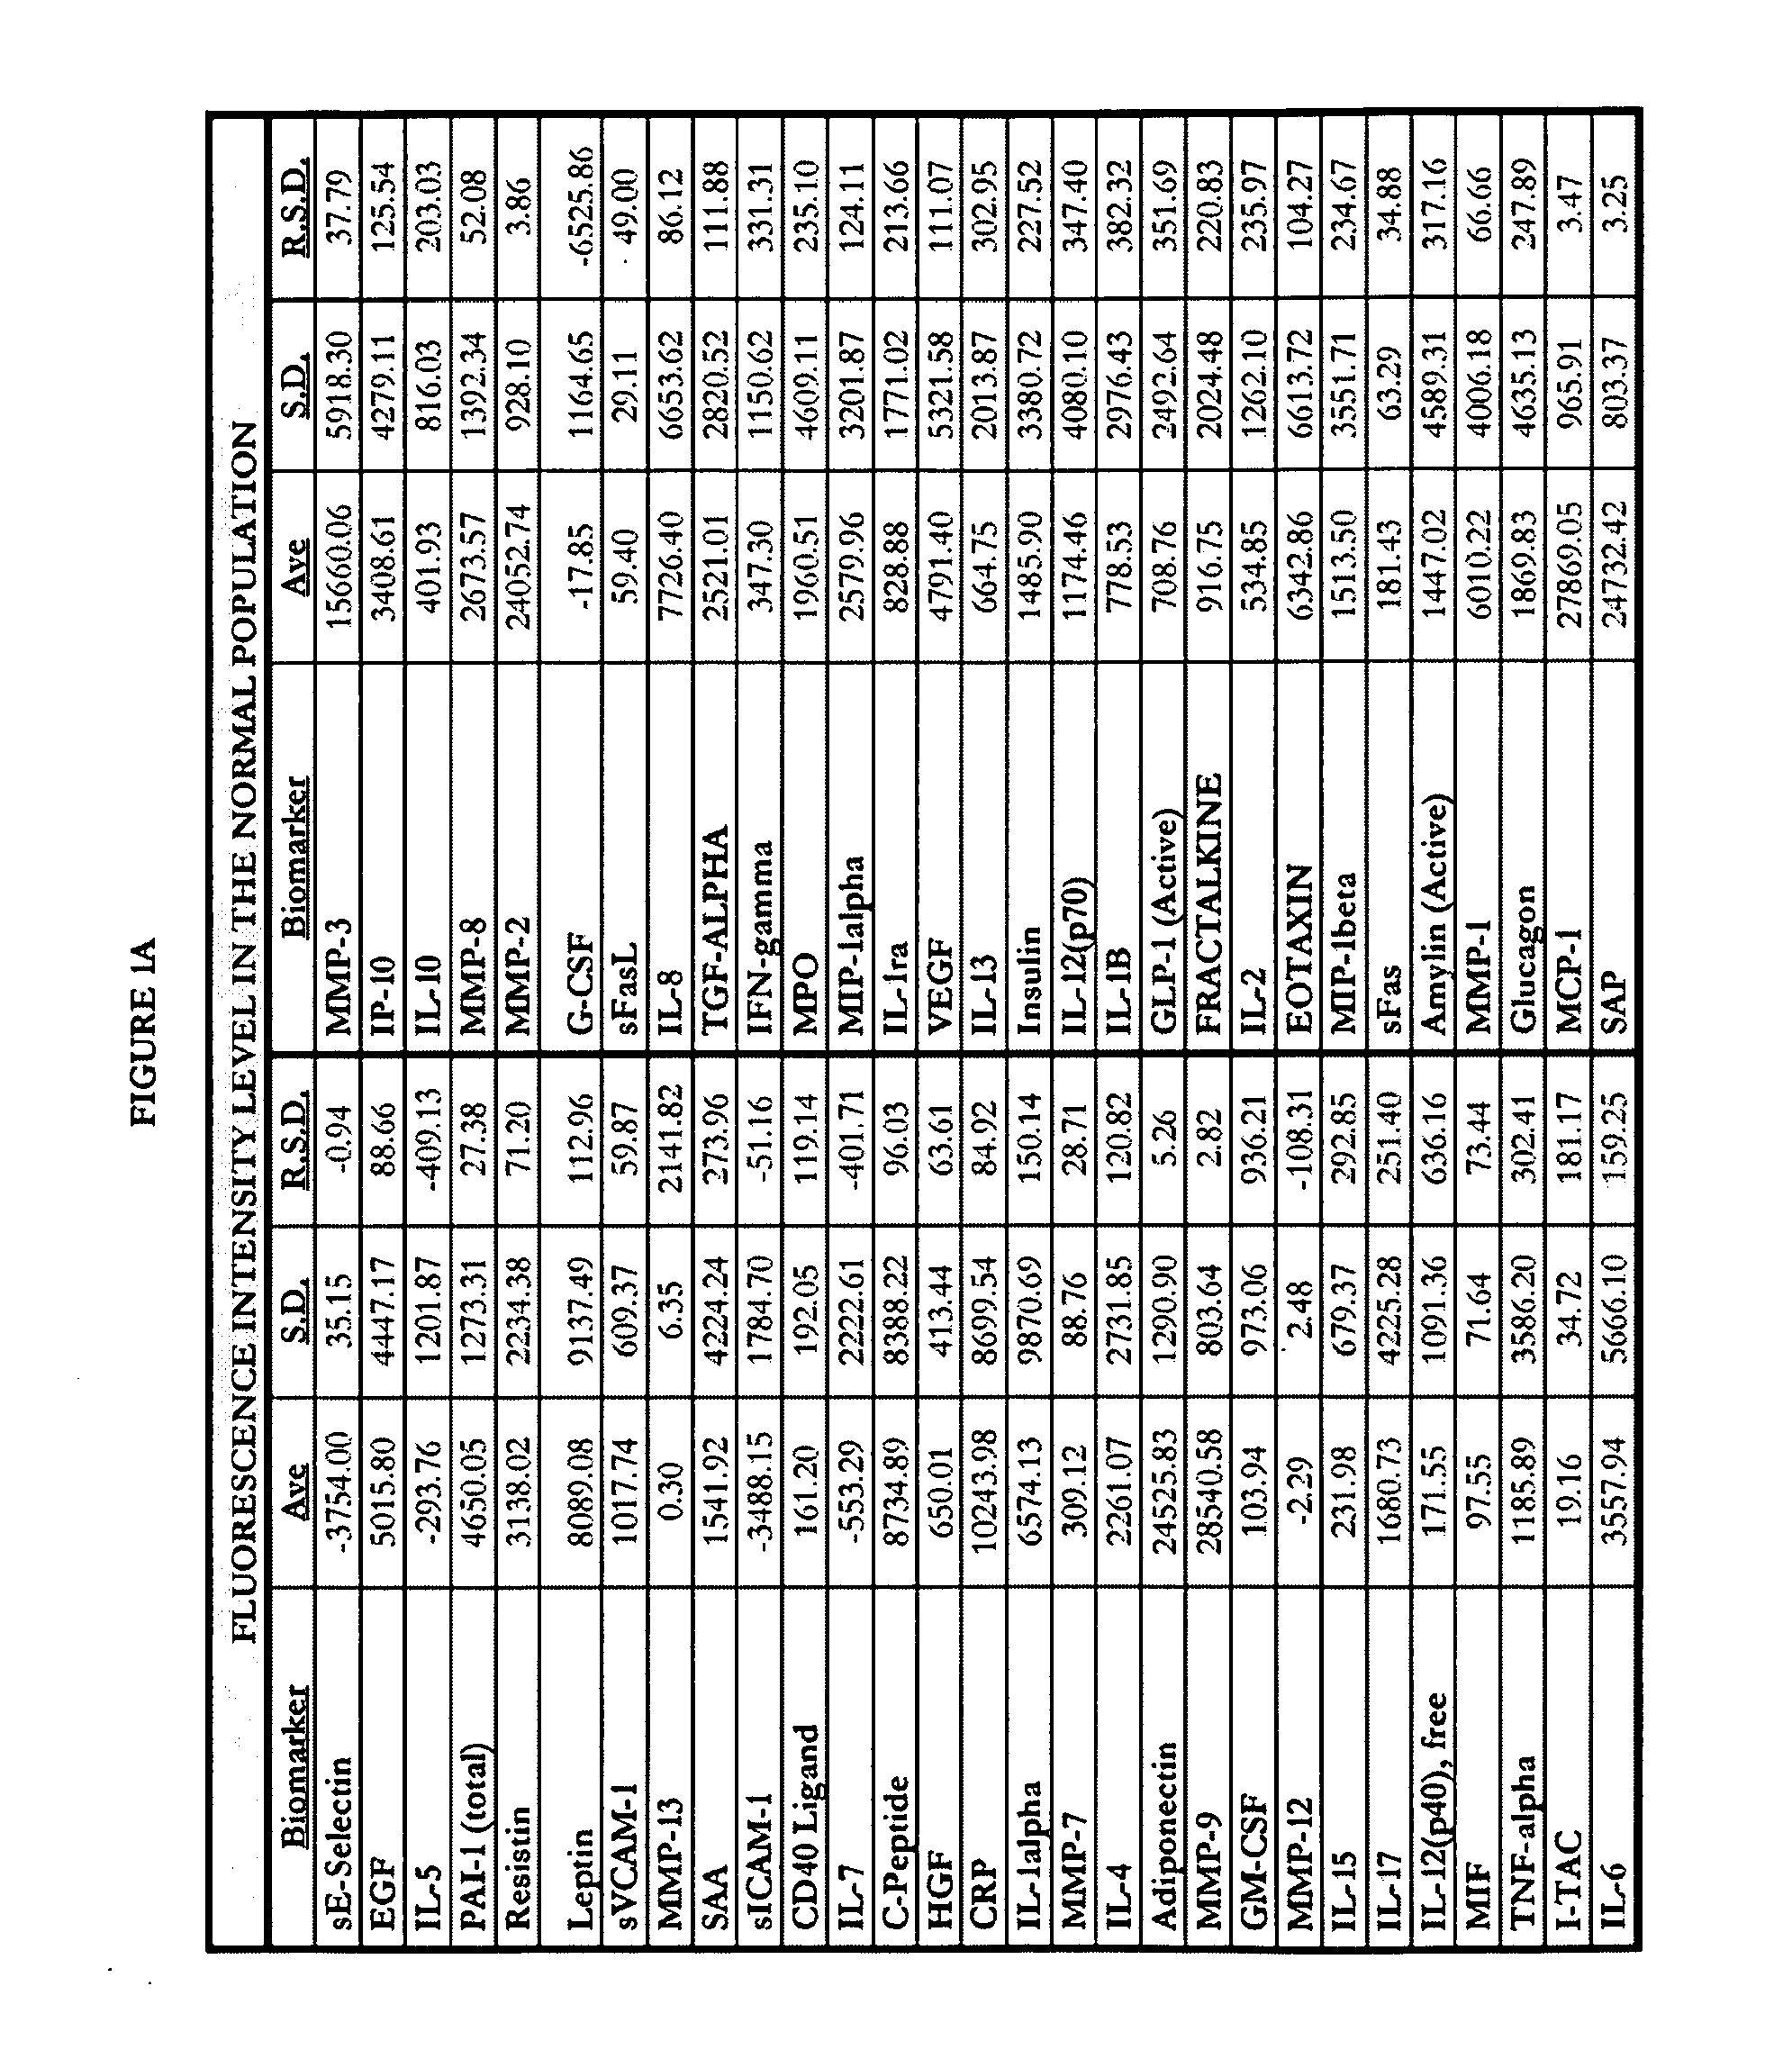 Methods of identification, assessment, prevention and therapy of lung diseases and kits thereof